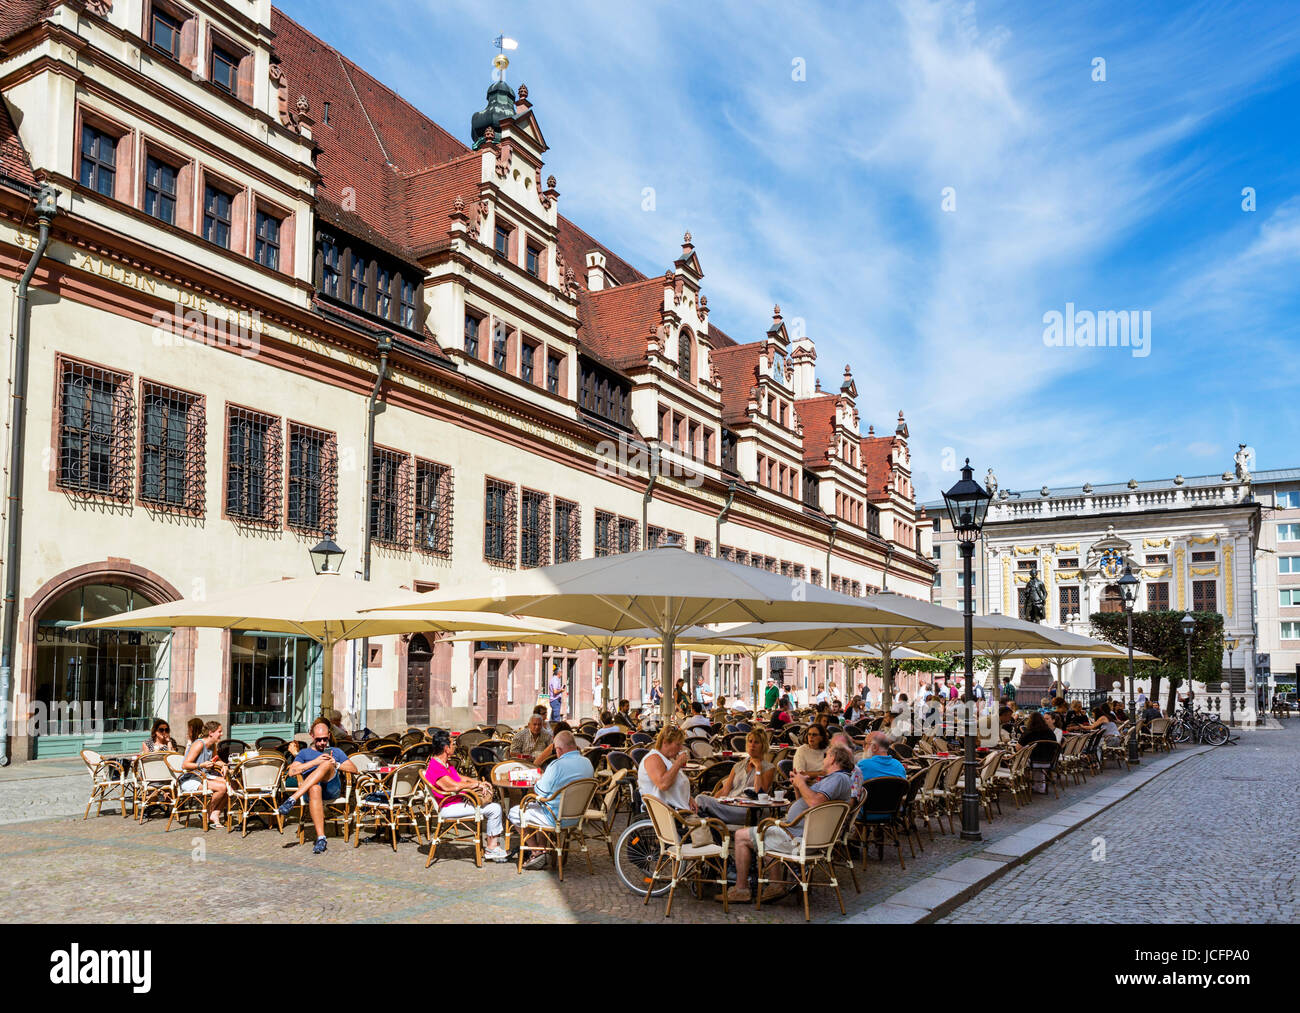 Sidewalk cafe in the Naschmarkt behind the Altes Rathaus (Old Town Hall) with the Old Bourse behind, Leipzig, Saxony, Germany Stock Photo